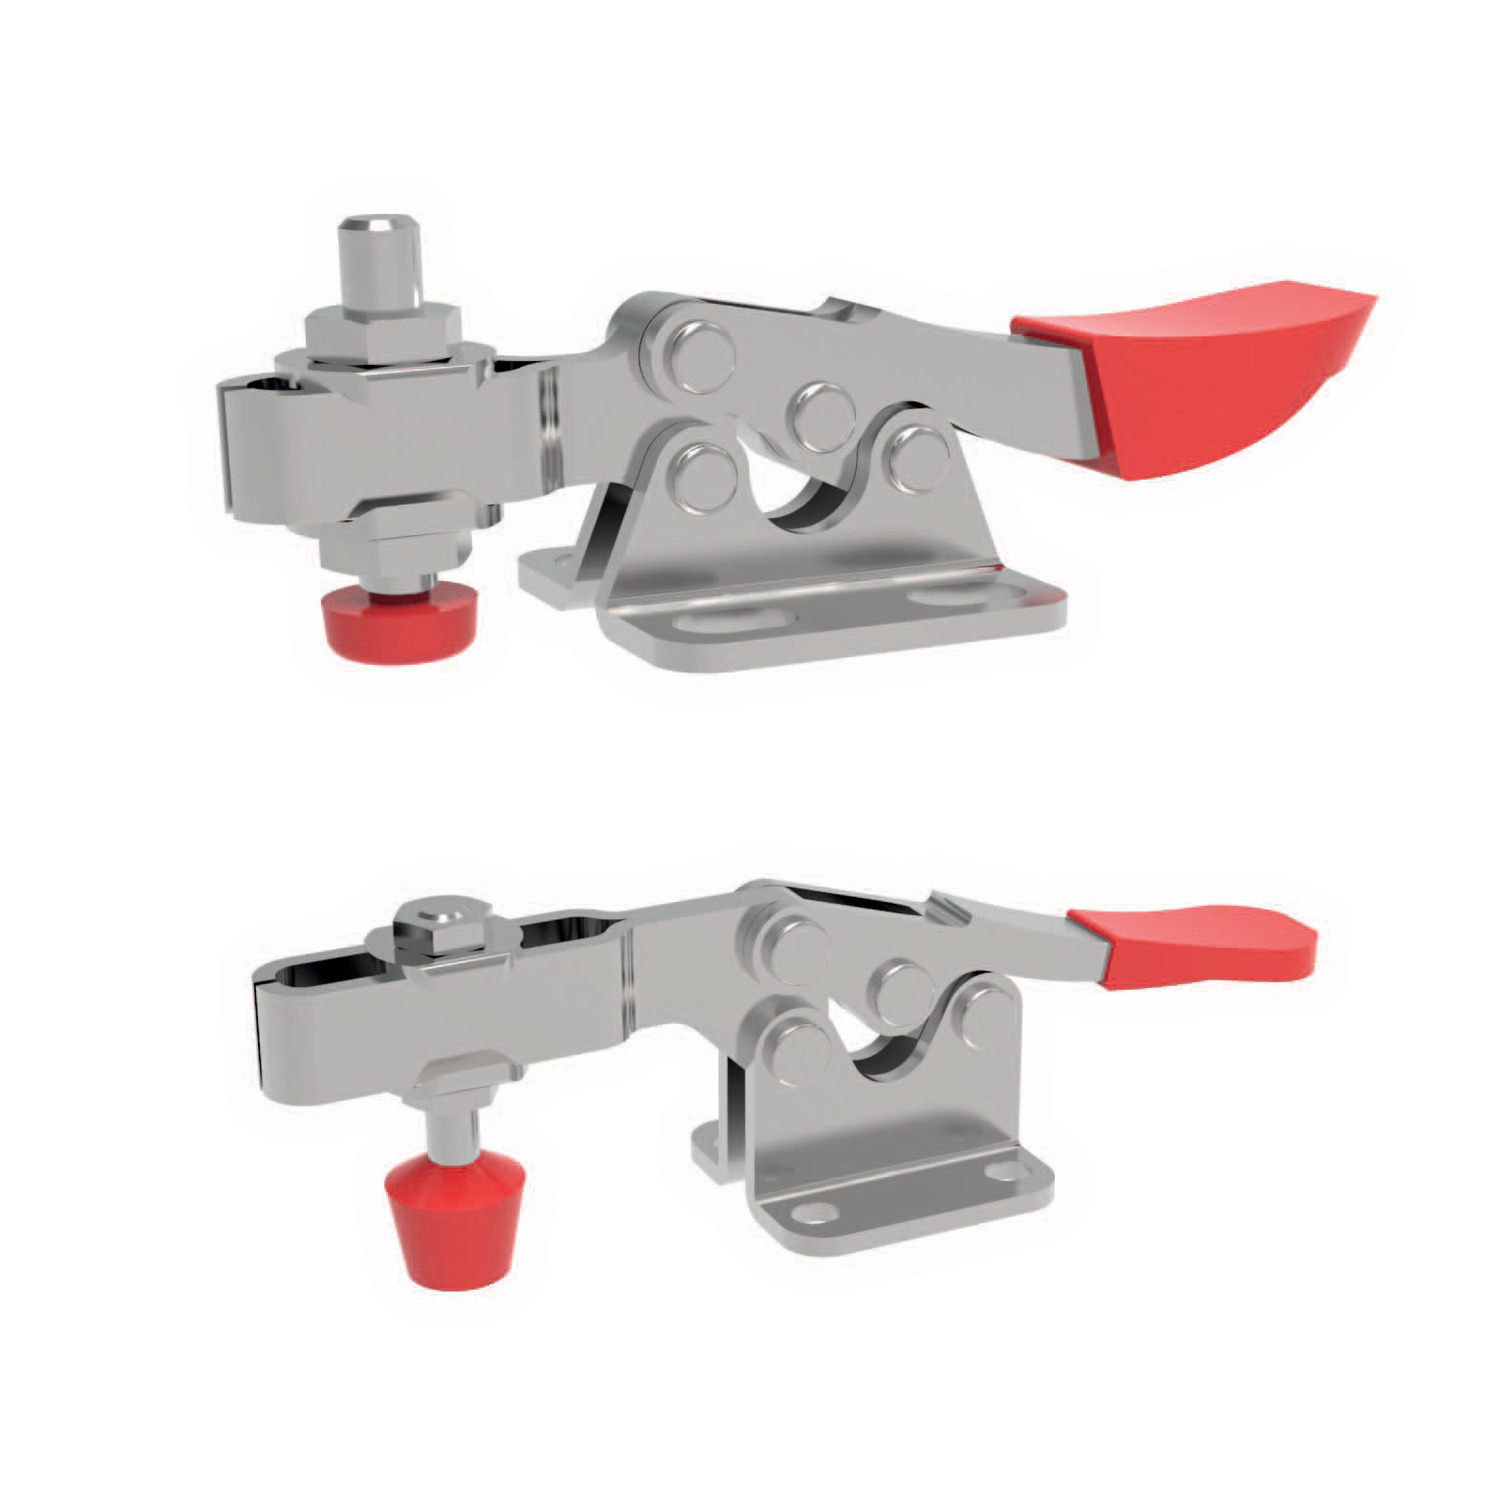 Economy Horizontal Acting Toggle Clamps Economy version of the horizontal acting toggle clamps made from zinc plated steel. Supplied with clamping screw and rubber nose.